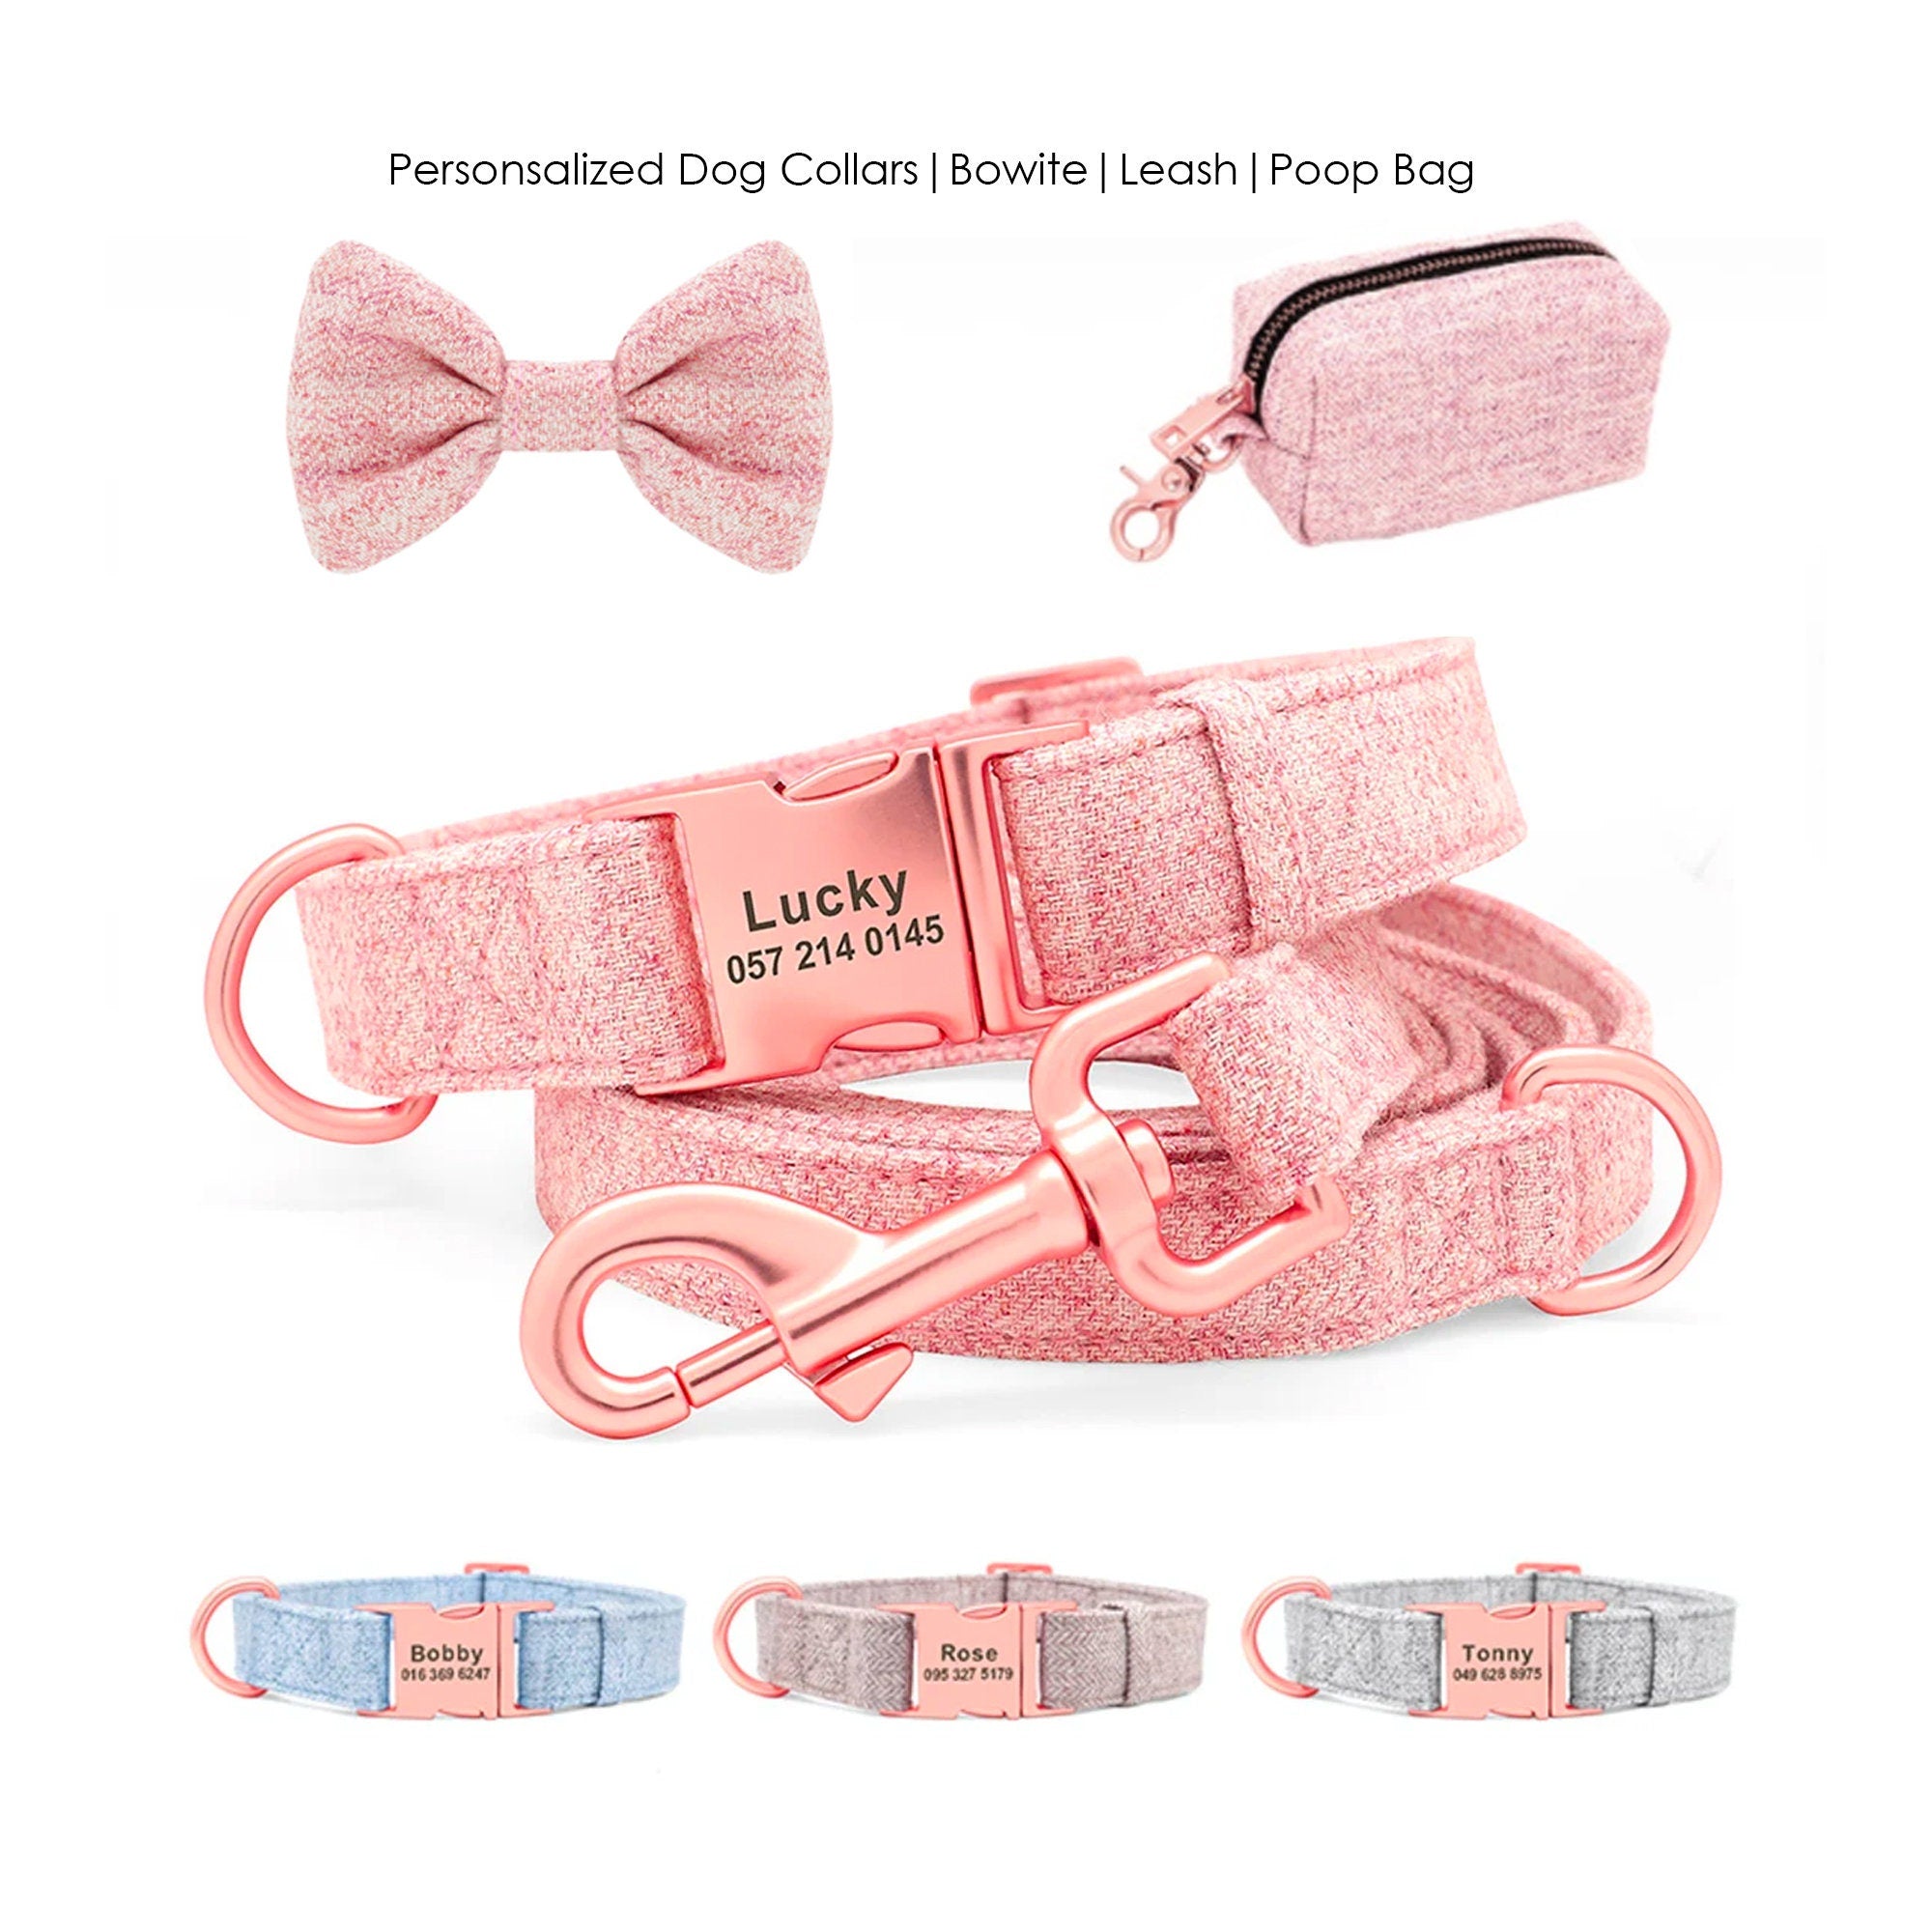 Personalized Laser Engraved Pastel Solid Color Dog Collar Rose Gold Plated buckle * Dog Bowtie, Dog Poop Bag Available